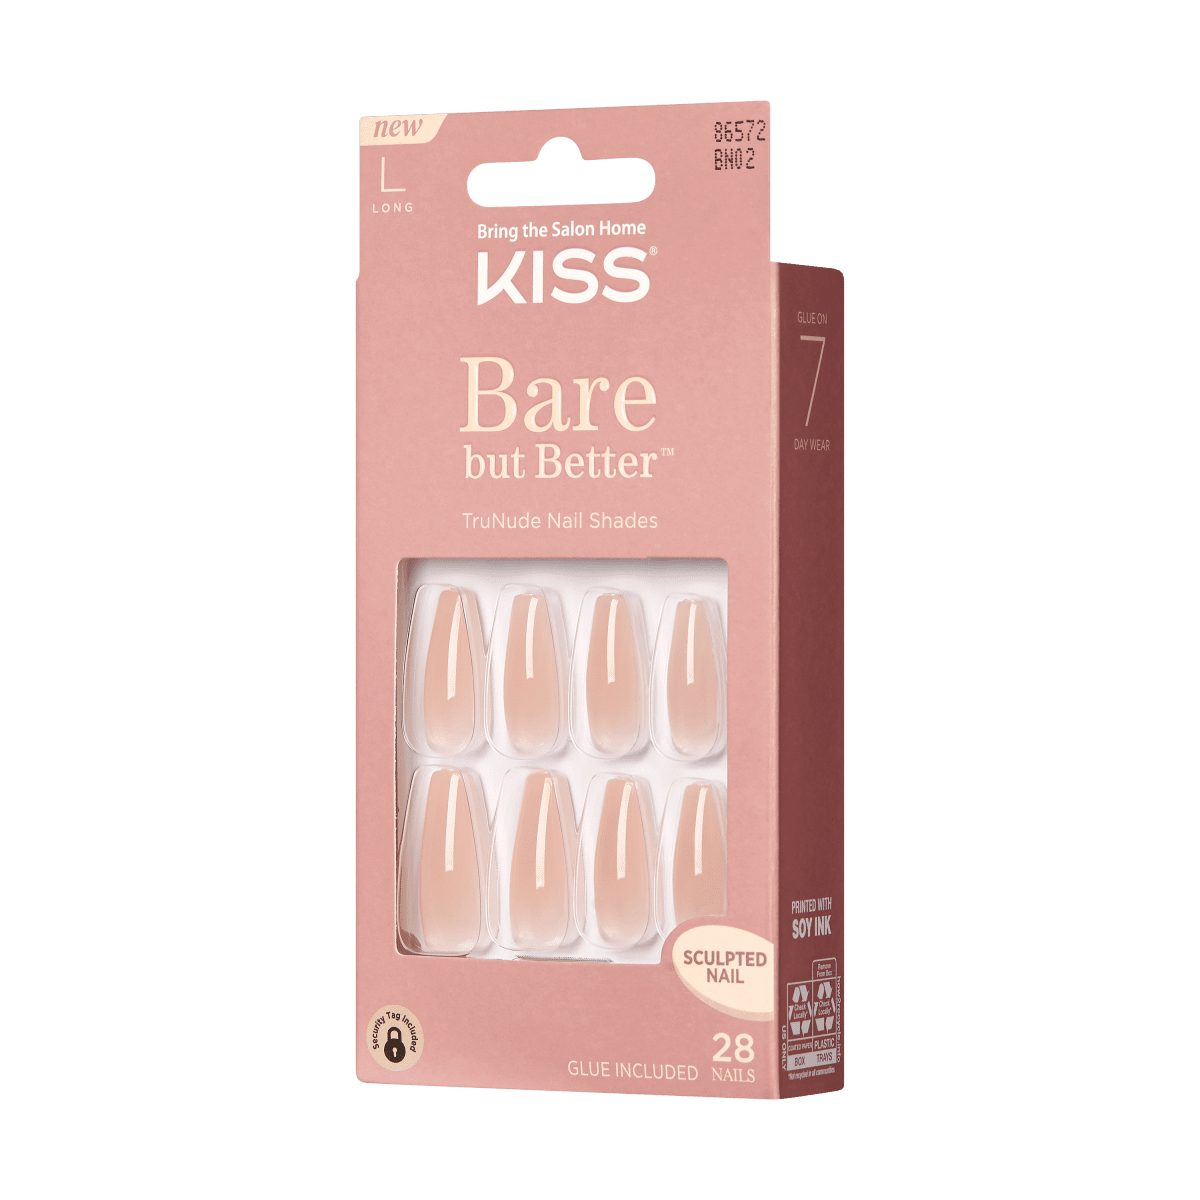 KISS Bare but Better Press-On Nails, Glossy Beige, Long Length, Coffin ...